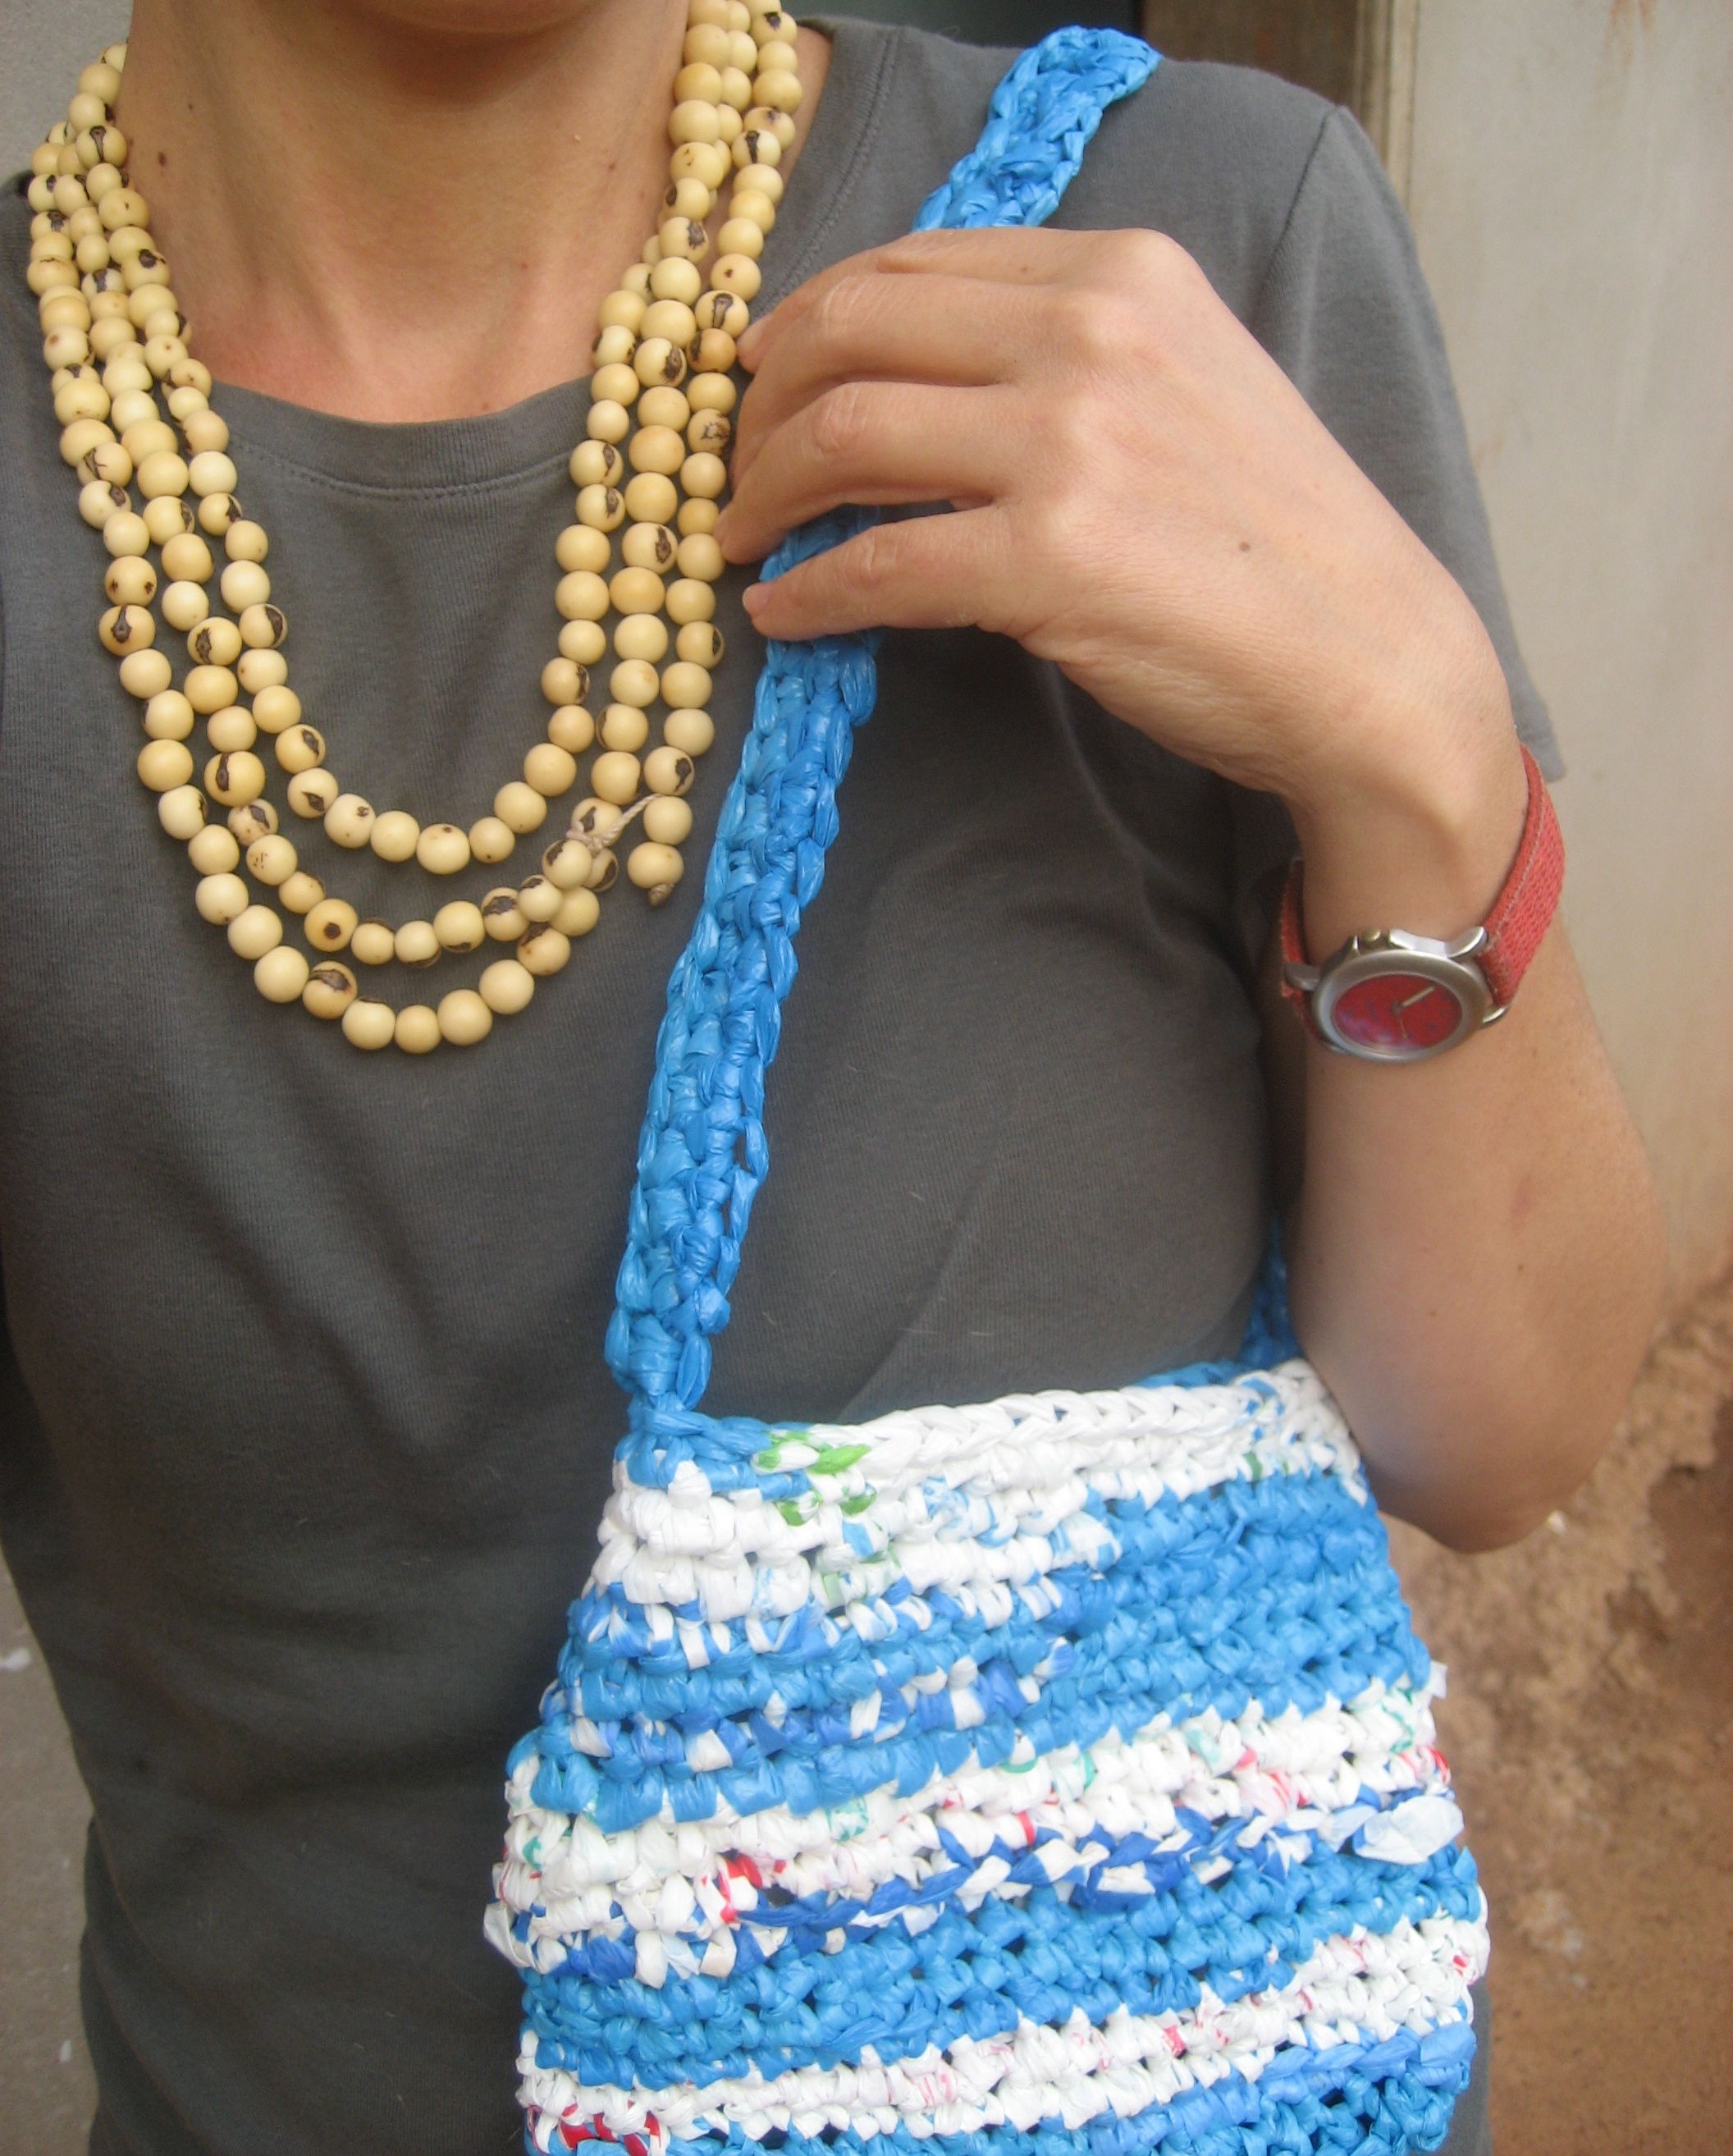 Plarn bags and purses made from recycled plastic bags